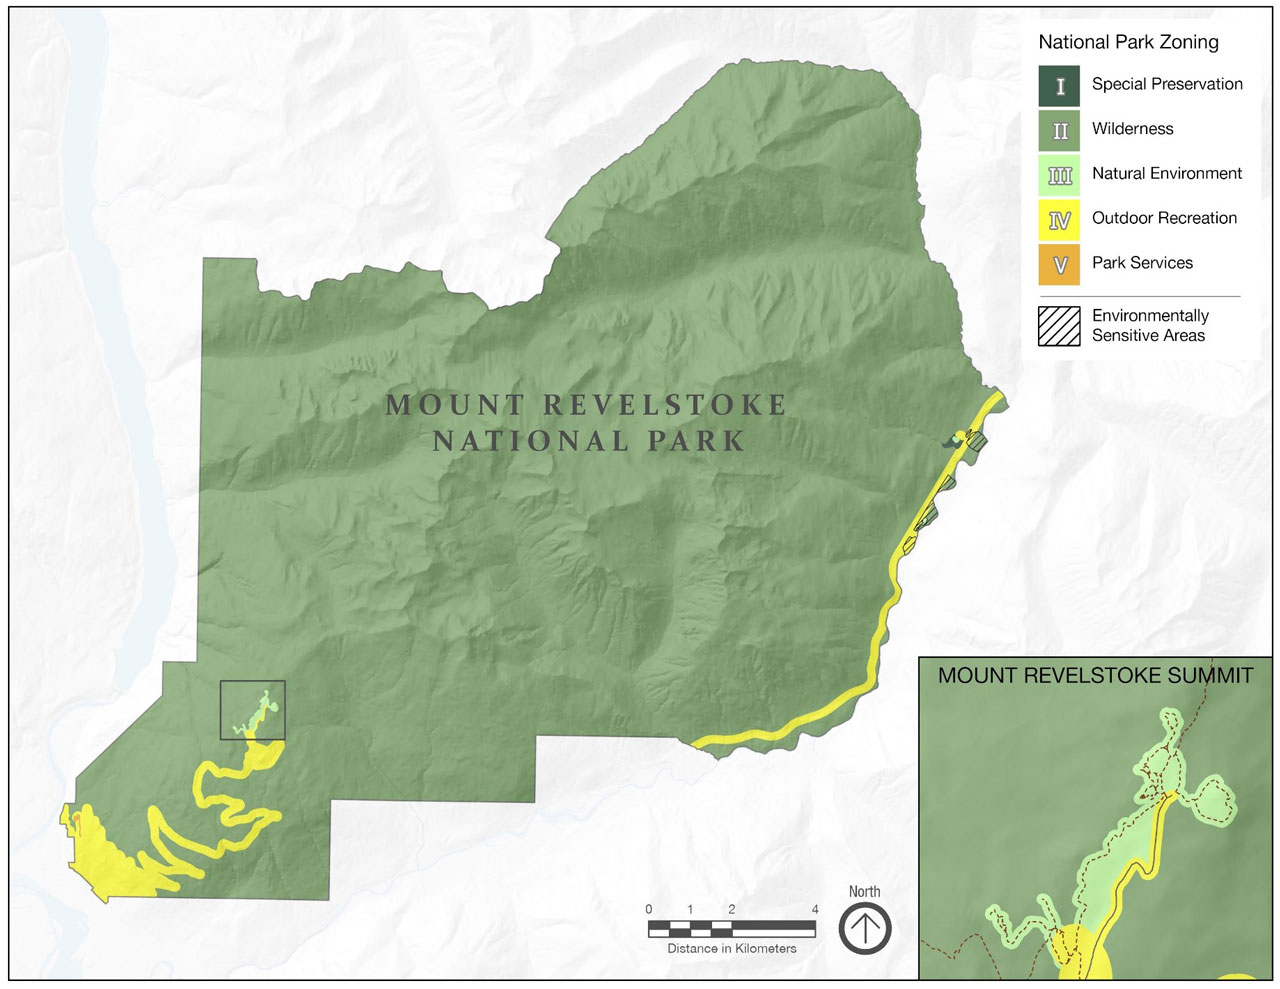 A map of Mount Revelstoke National Park. Regions on the map are colour-coded to indicate their classification as specific zone types or environmentally sensitive areas. An inset map zooms in on the zoning at the summit of Mount Revelstoke.